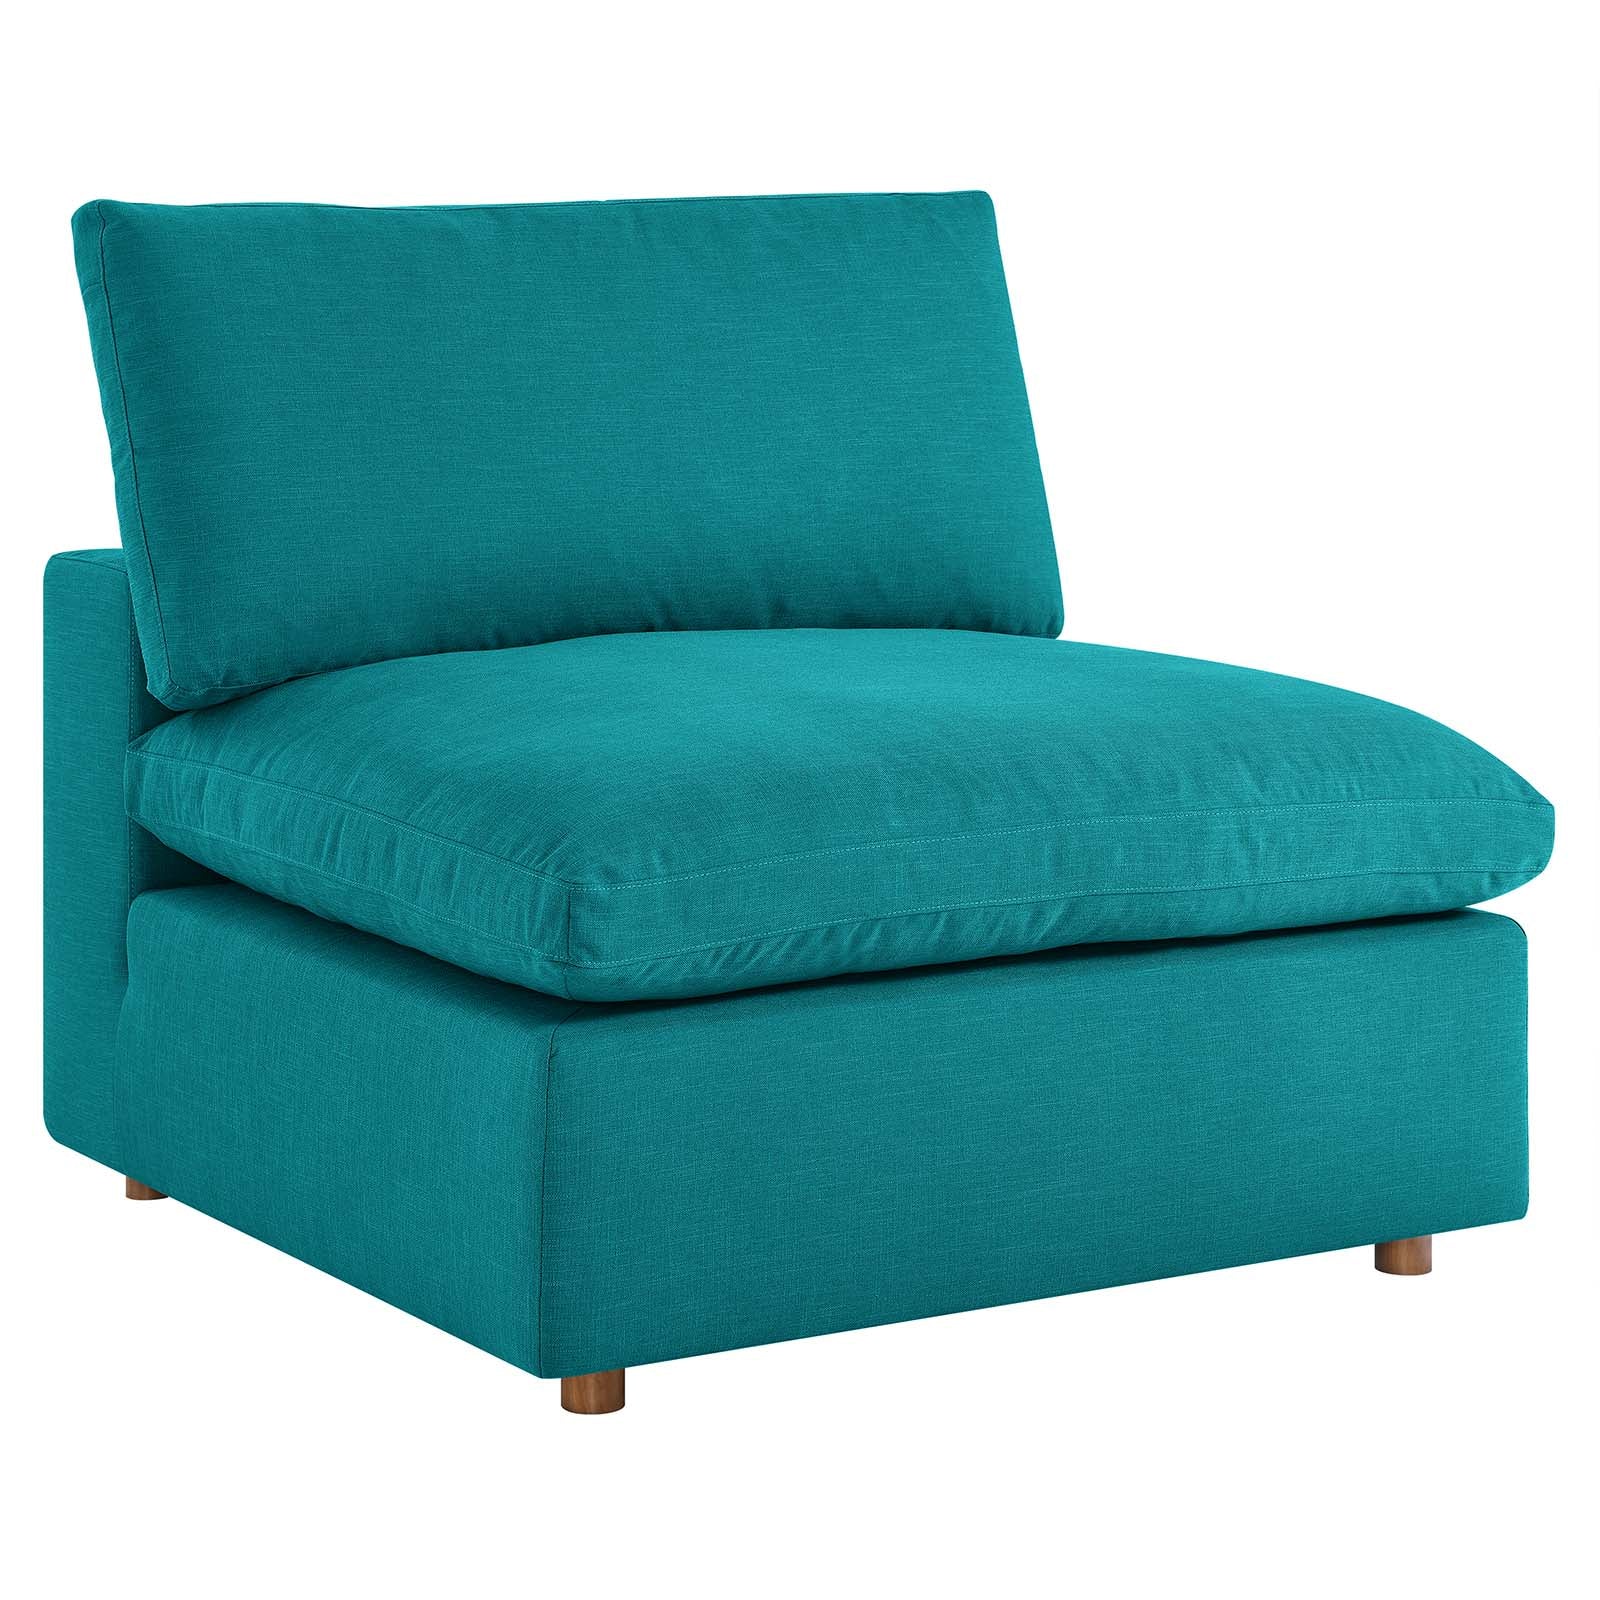 Modway Sectional Sofas - Commix Down Filled Overstuffed 4 Piece Sectional Sofa Set Teal